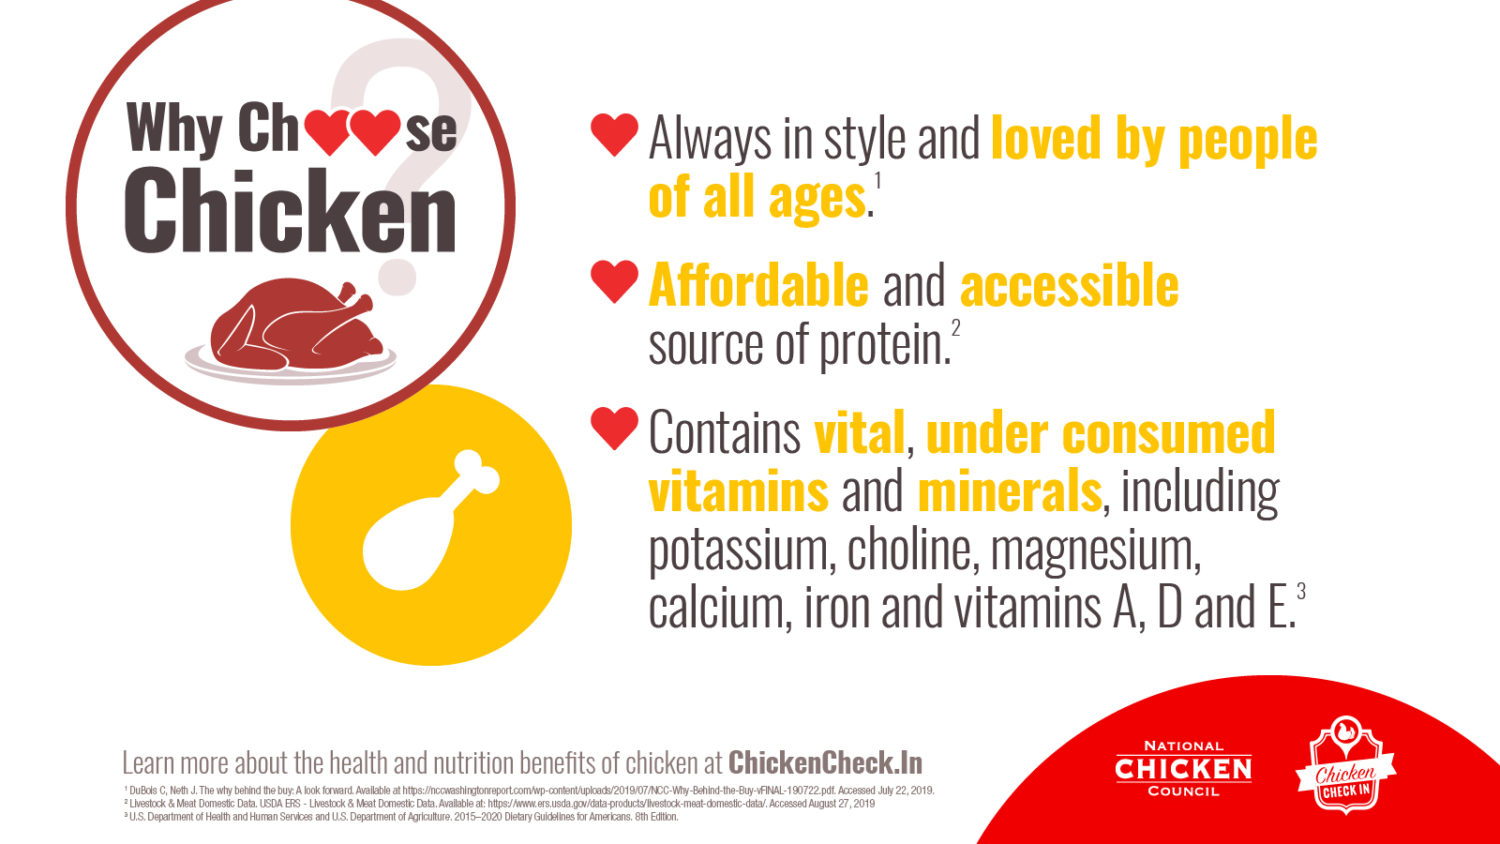 Other Reasons to Love Chicken. It’s a meal that’s a people-pleaser for all ages. It’s more affordable than other types of poultry, beef or pork. It’s one of the most accessible sources of protein. It plays an important role in nutrition through the stages of life.